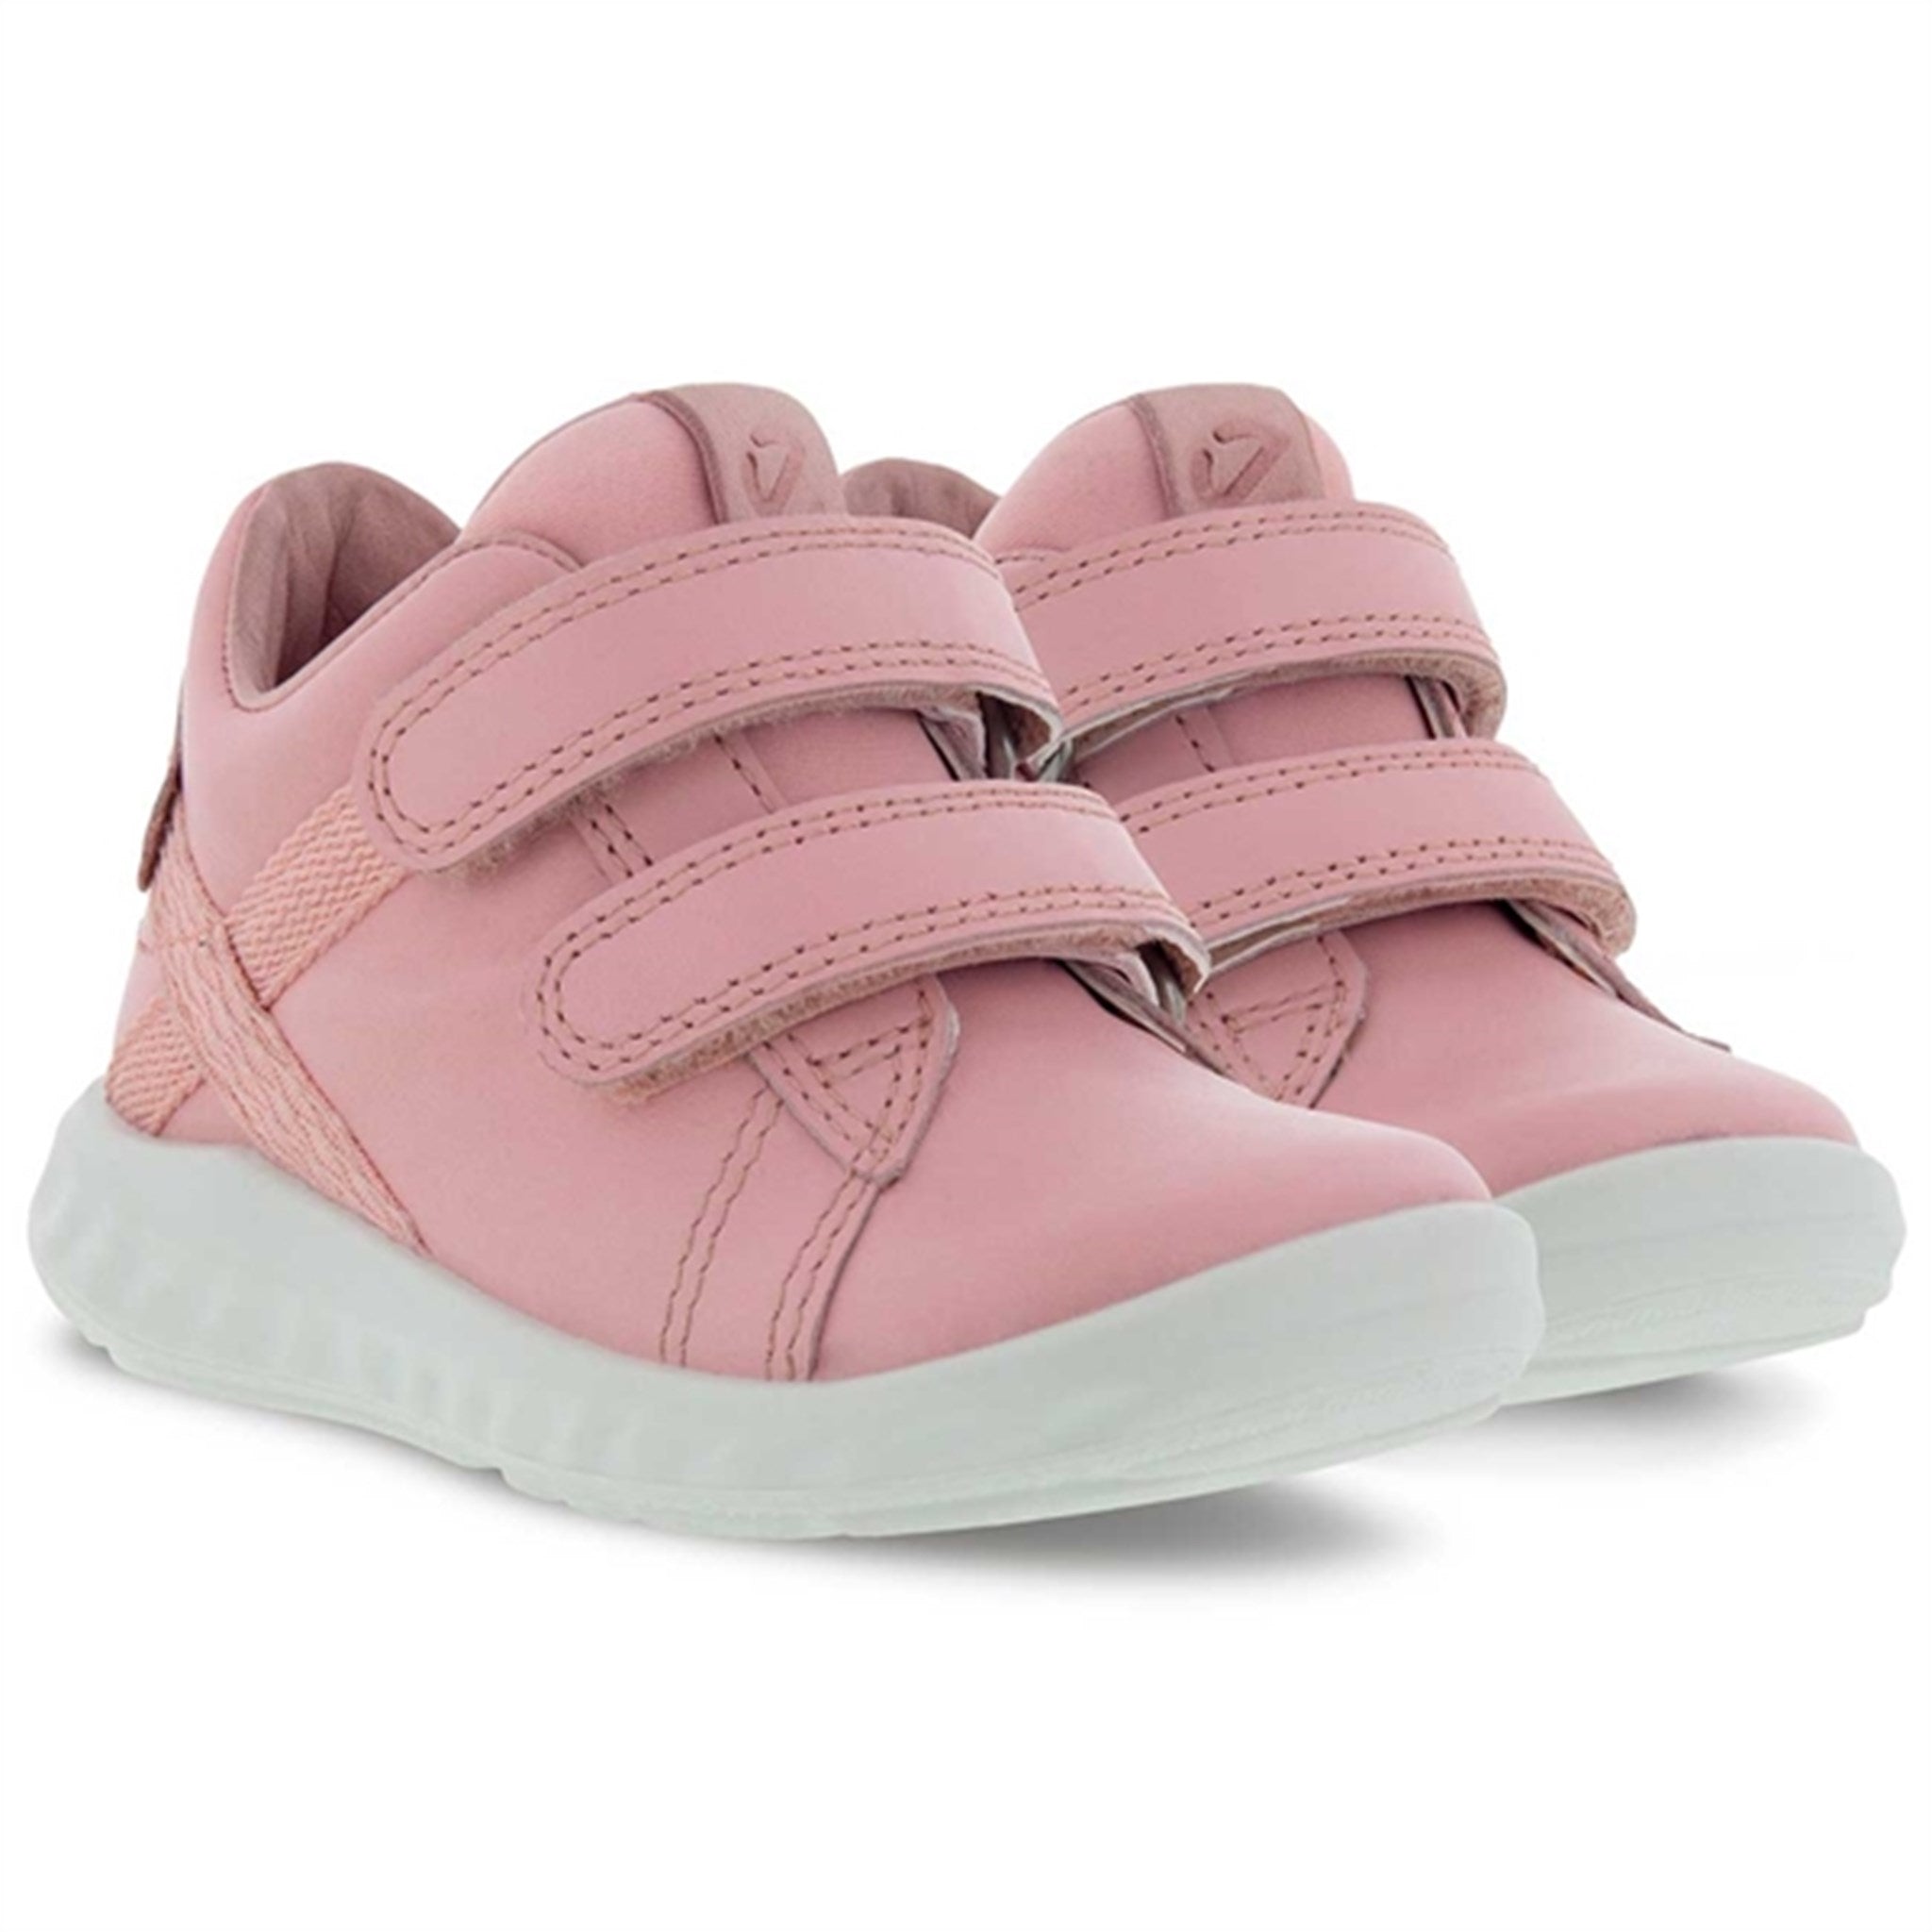 Ecco Lite Infant Silver Pink Shoes 6